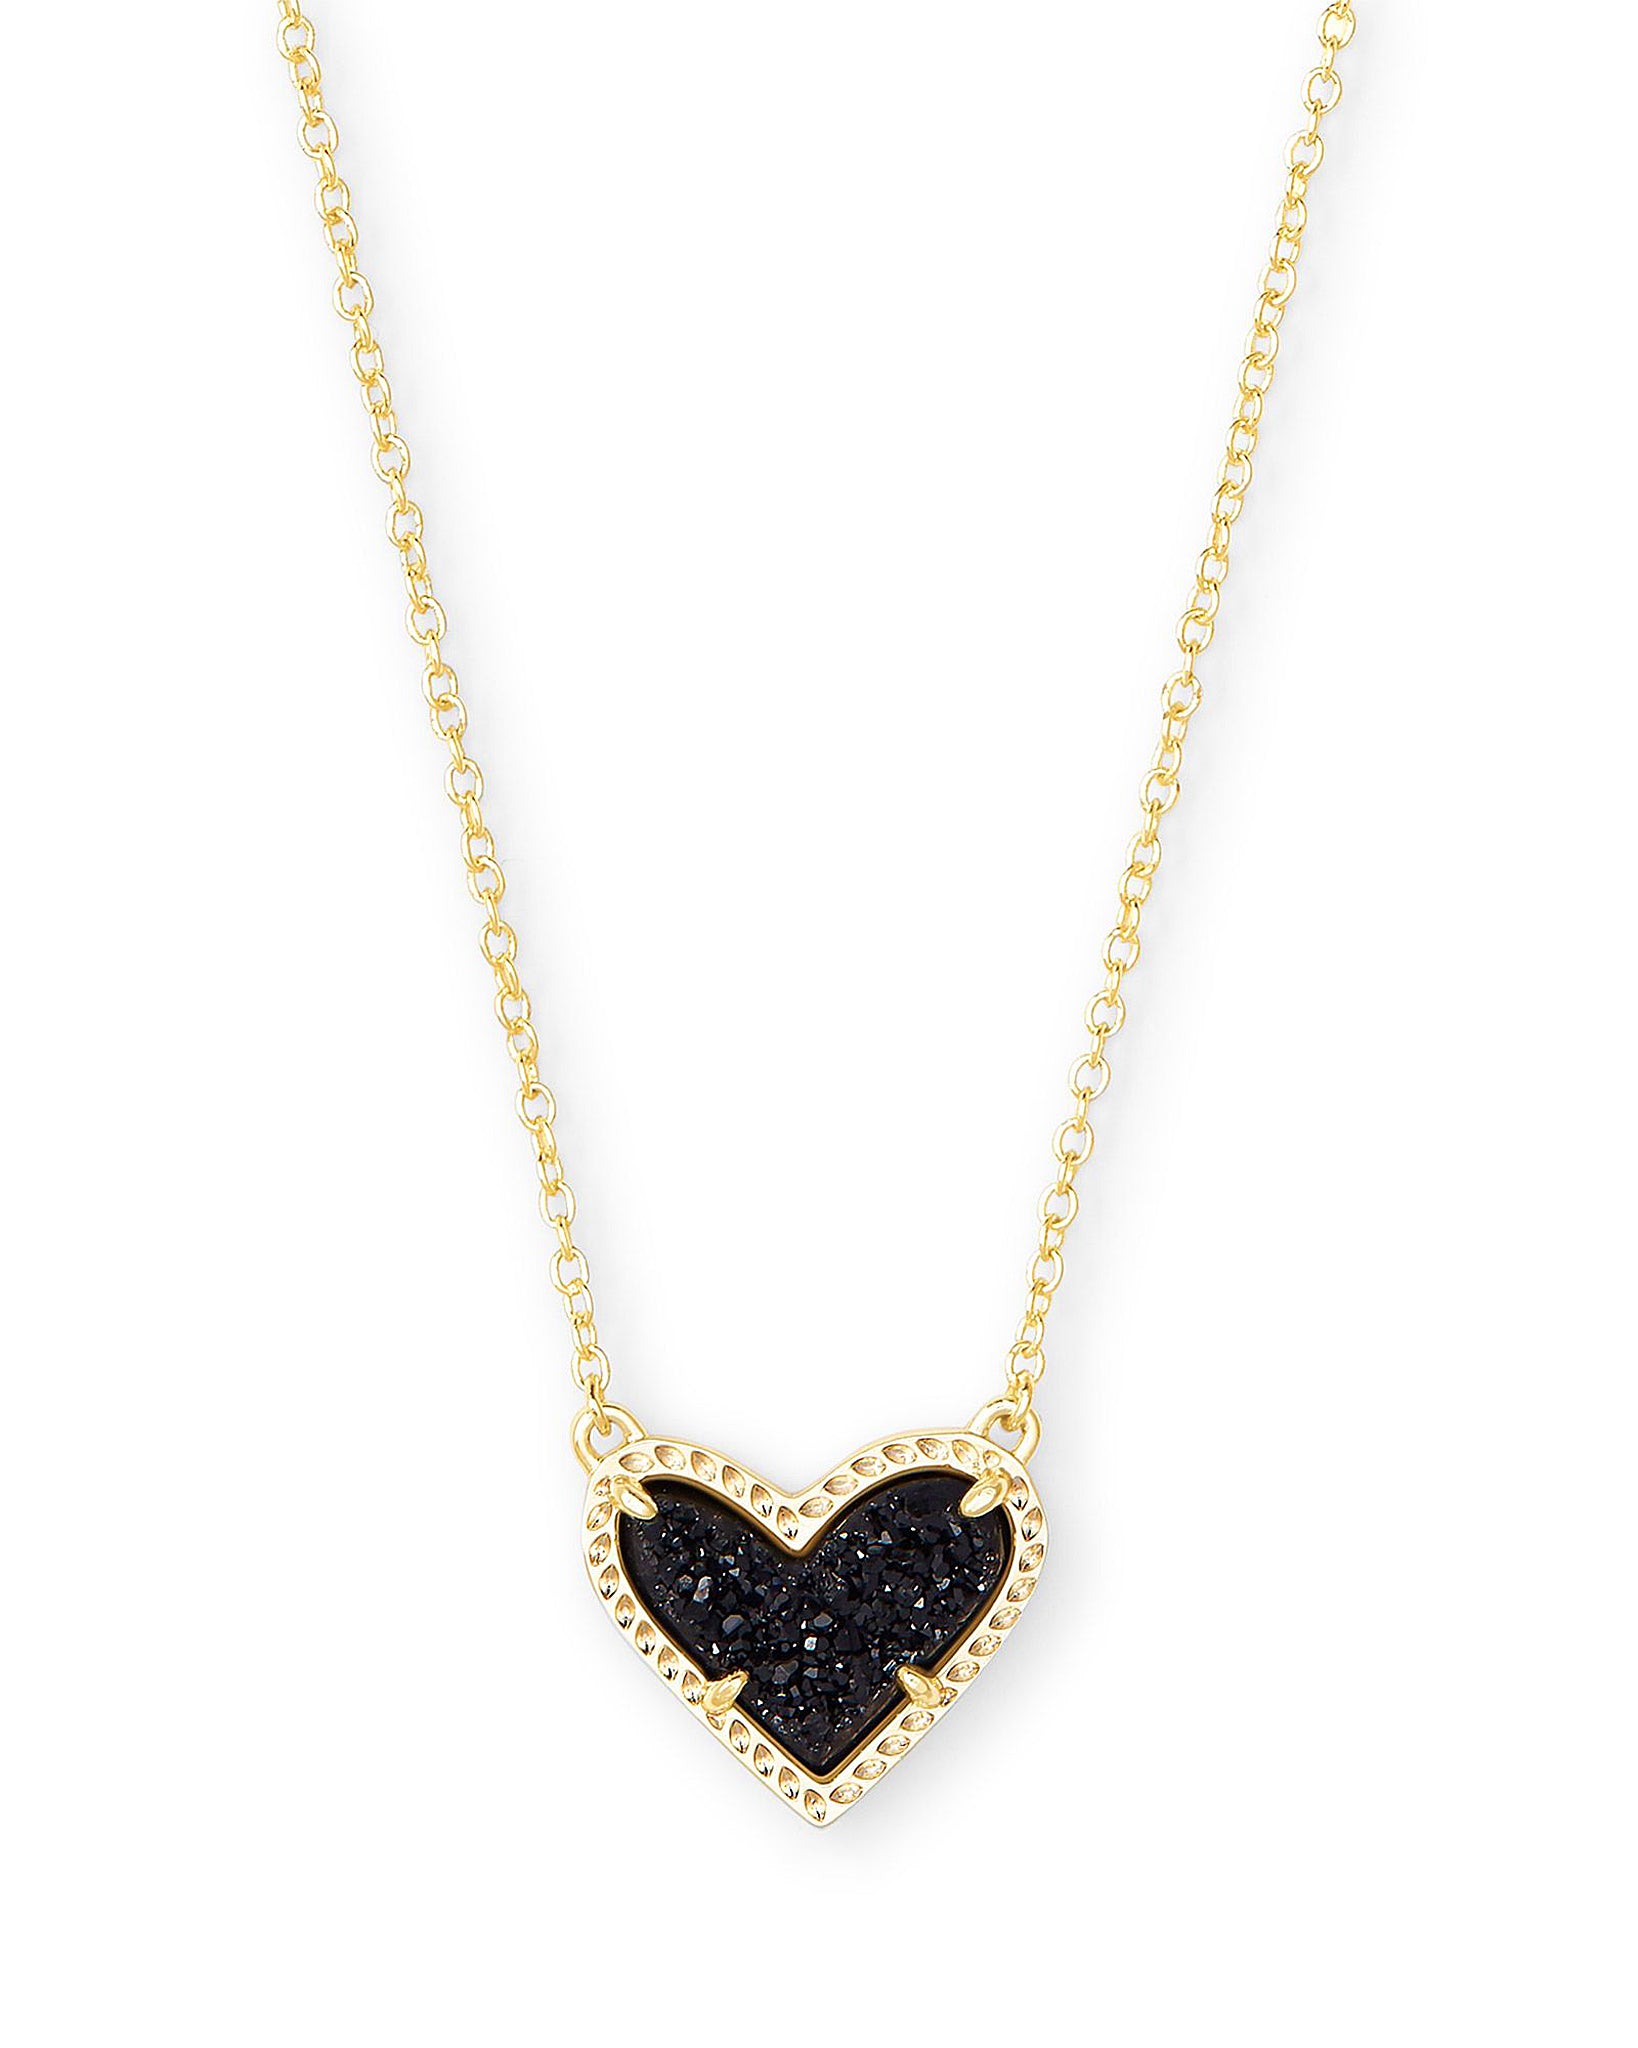 Kendra Scott Ari Heart Pendant Necklace in Black Drusy and Gold Plated